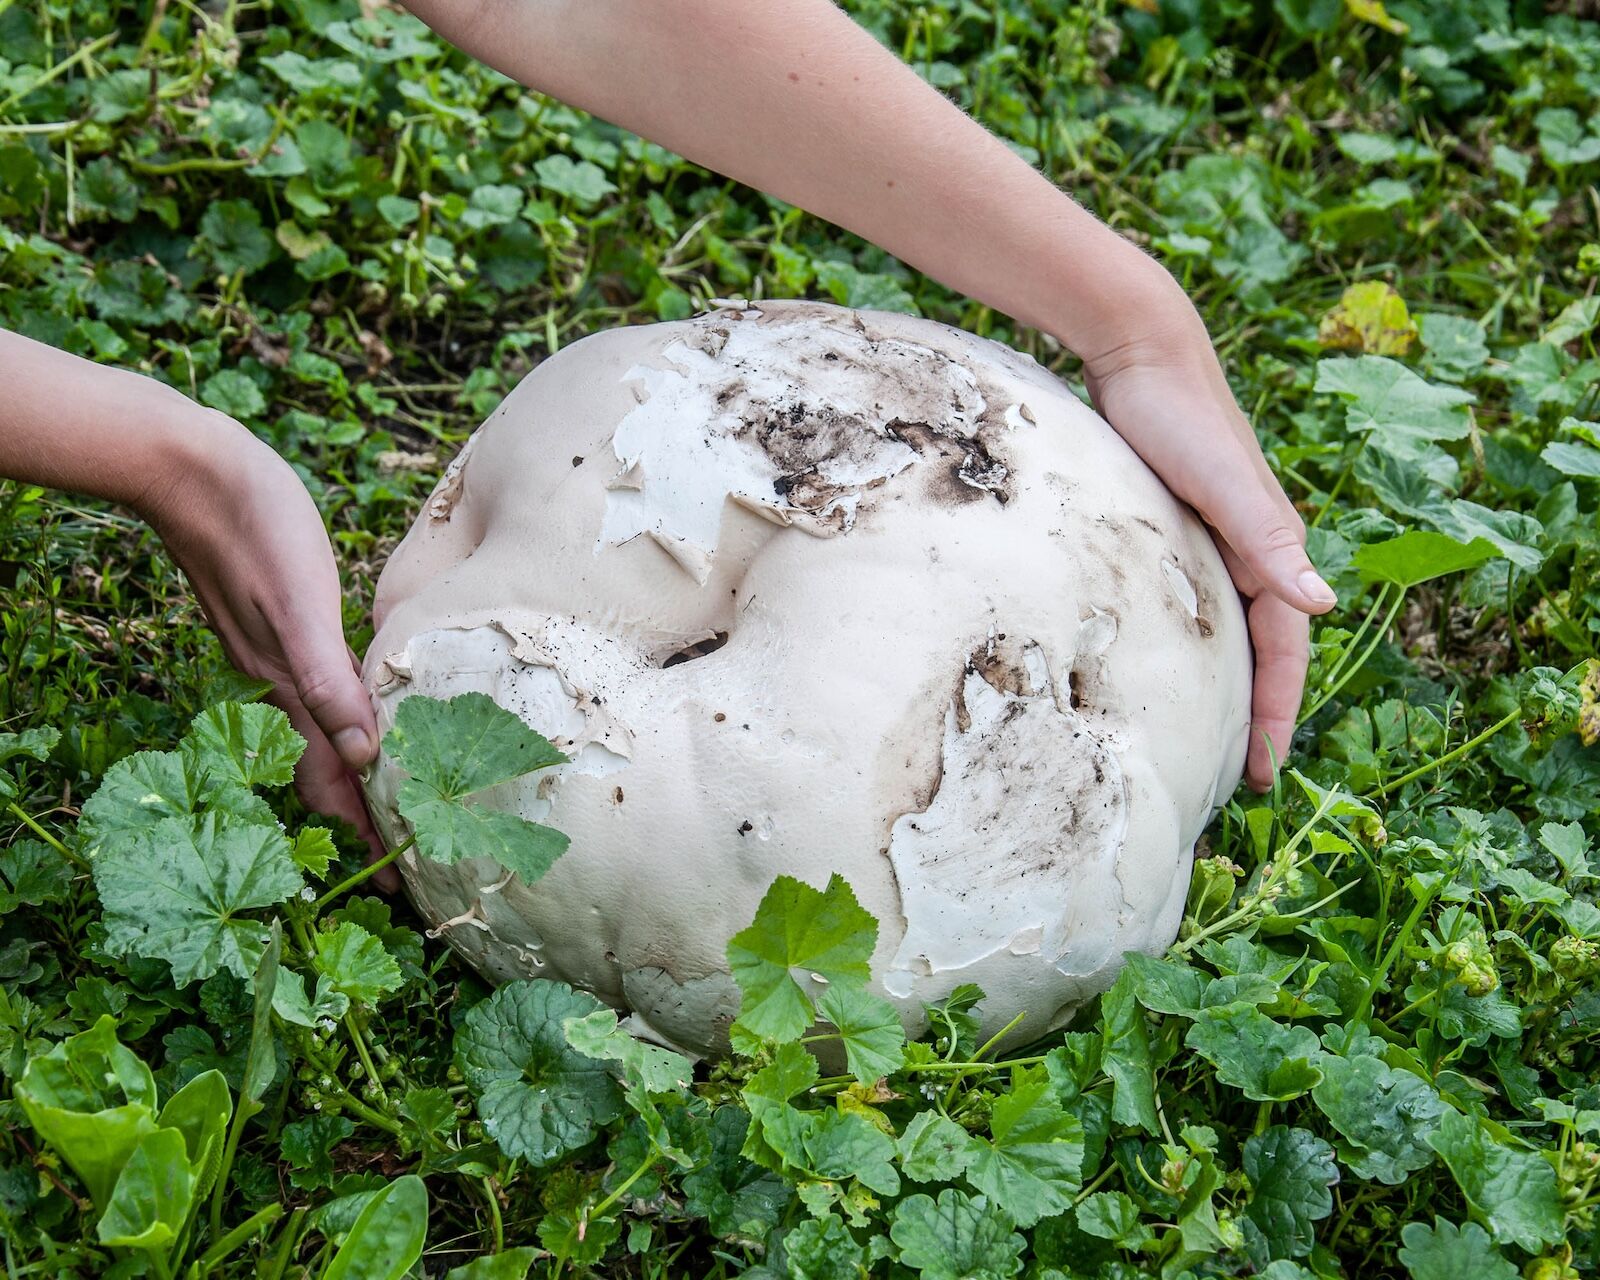 Giant puffball in hands is edible and medicinal mushroom, it grows in sunny places